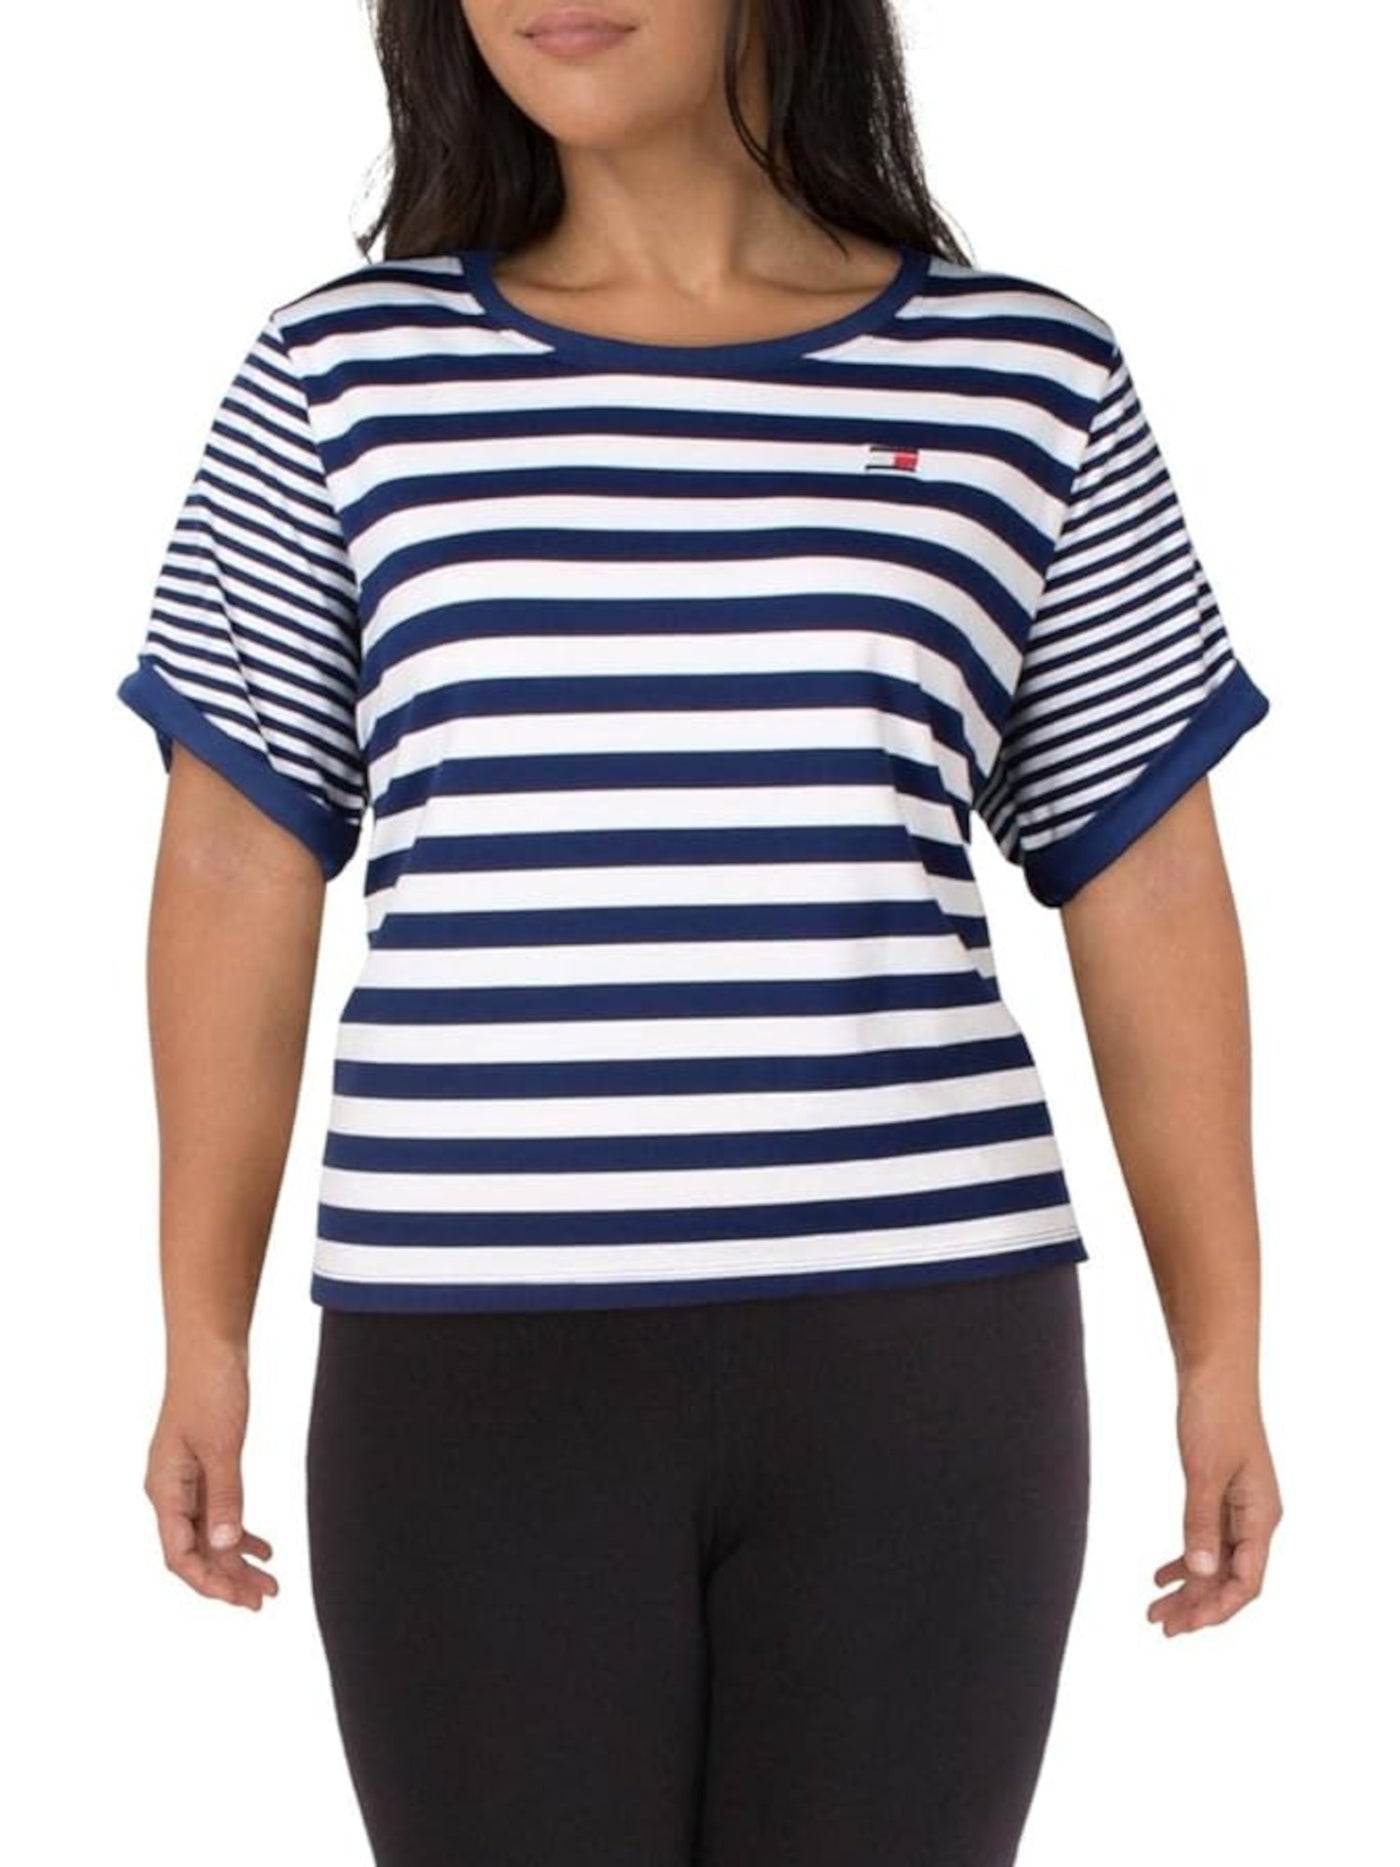 TOMMY HILFIGER SPORT Womens Blue Stretch Ribbed Striped Short Sleeve Round Neck Top Plus 0X